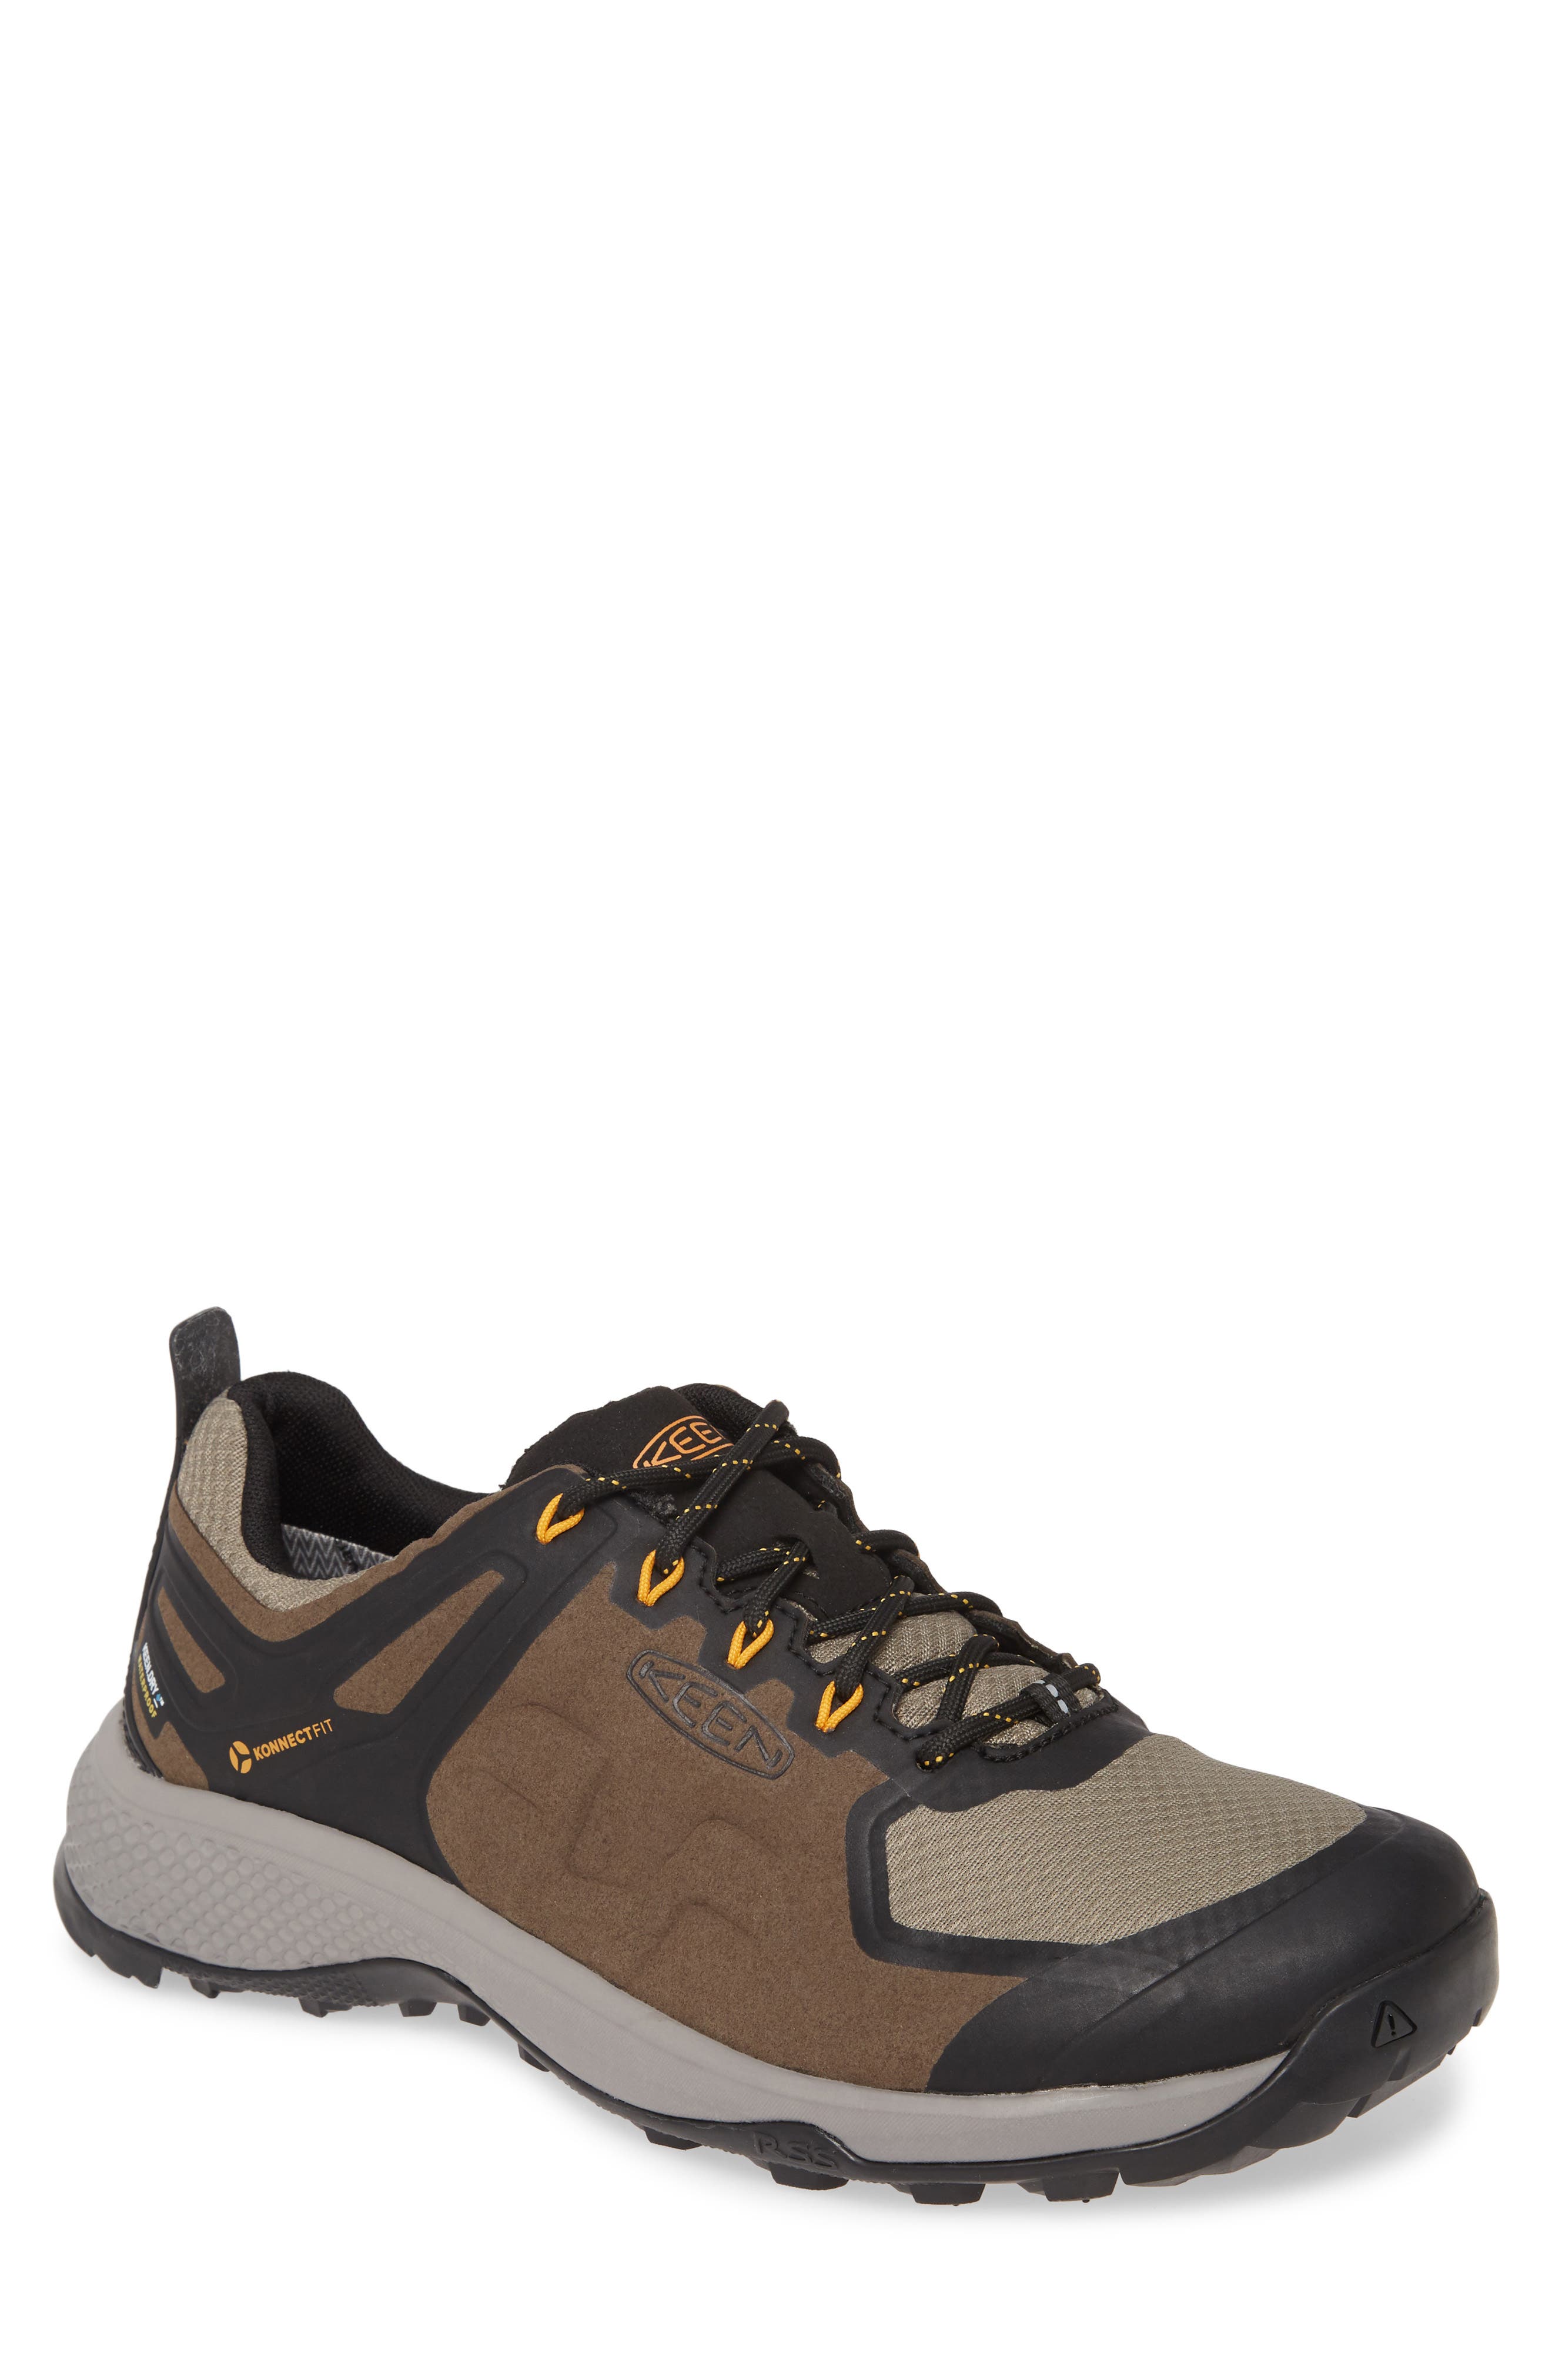 keen men's shoes clearance